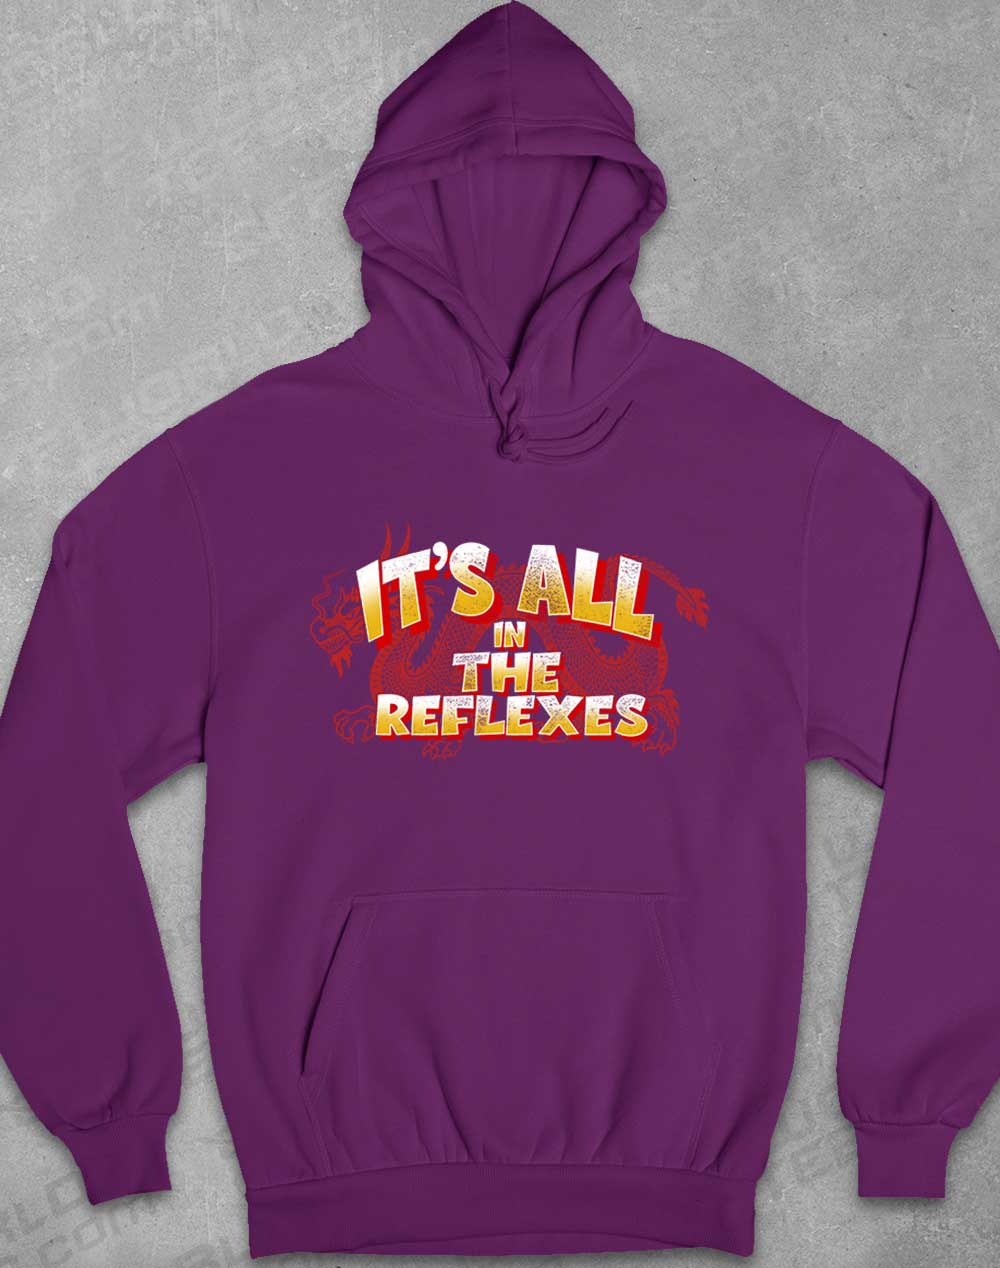 Plum - It's All in the Reflexes Hoodie